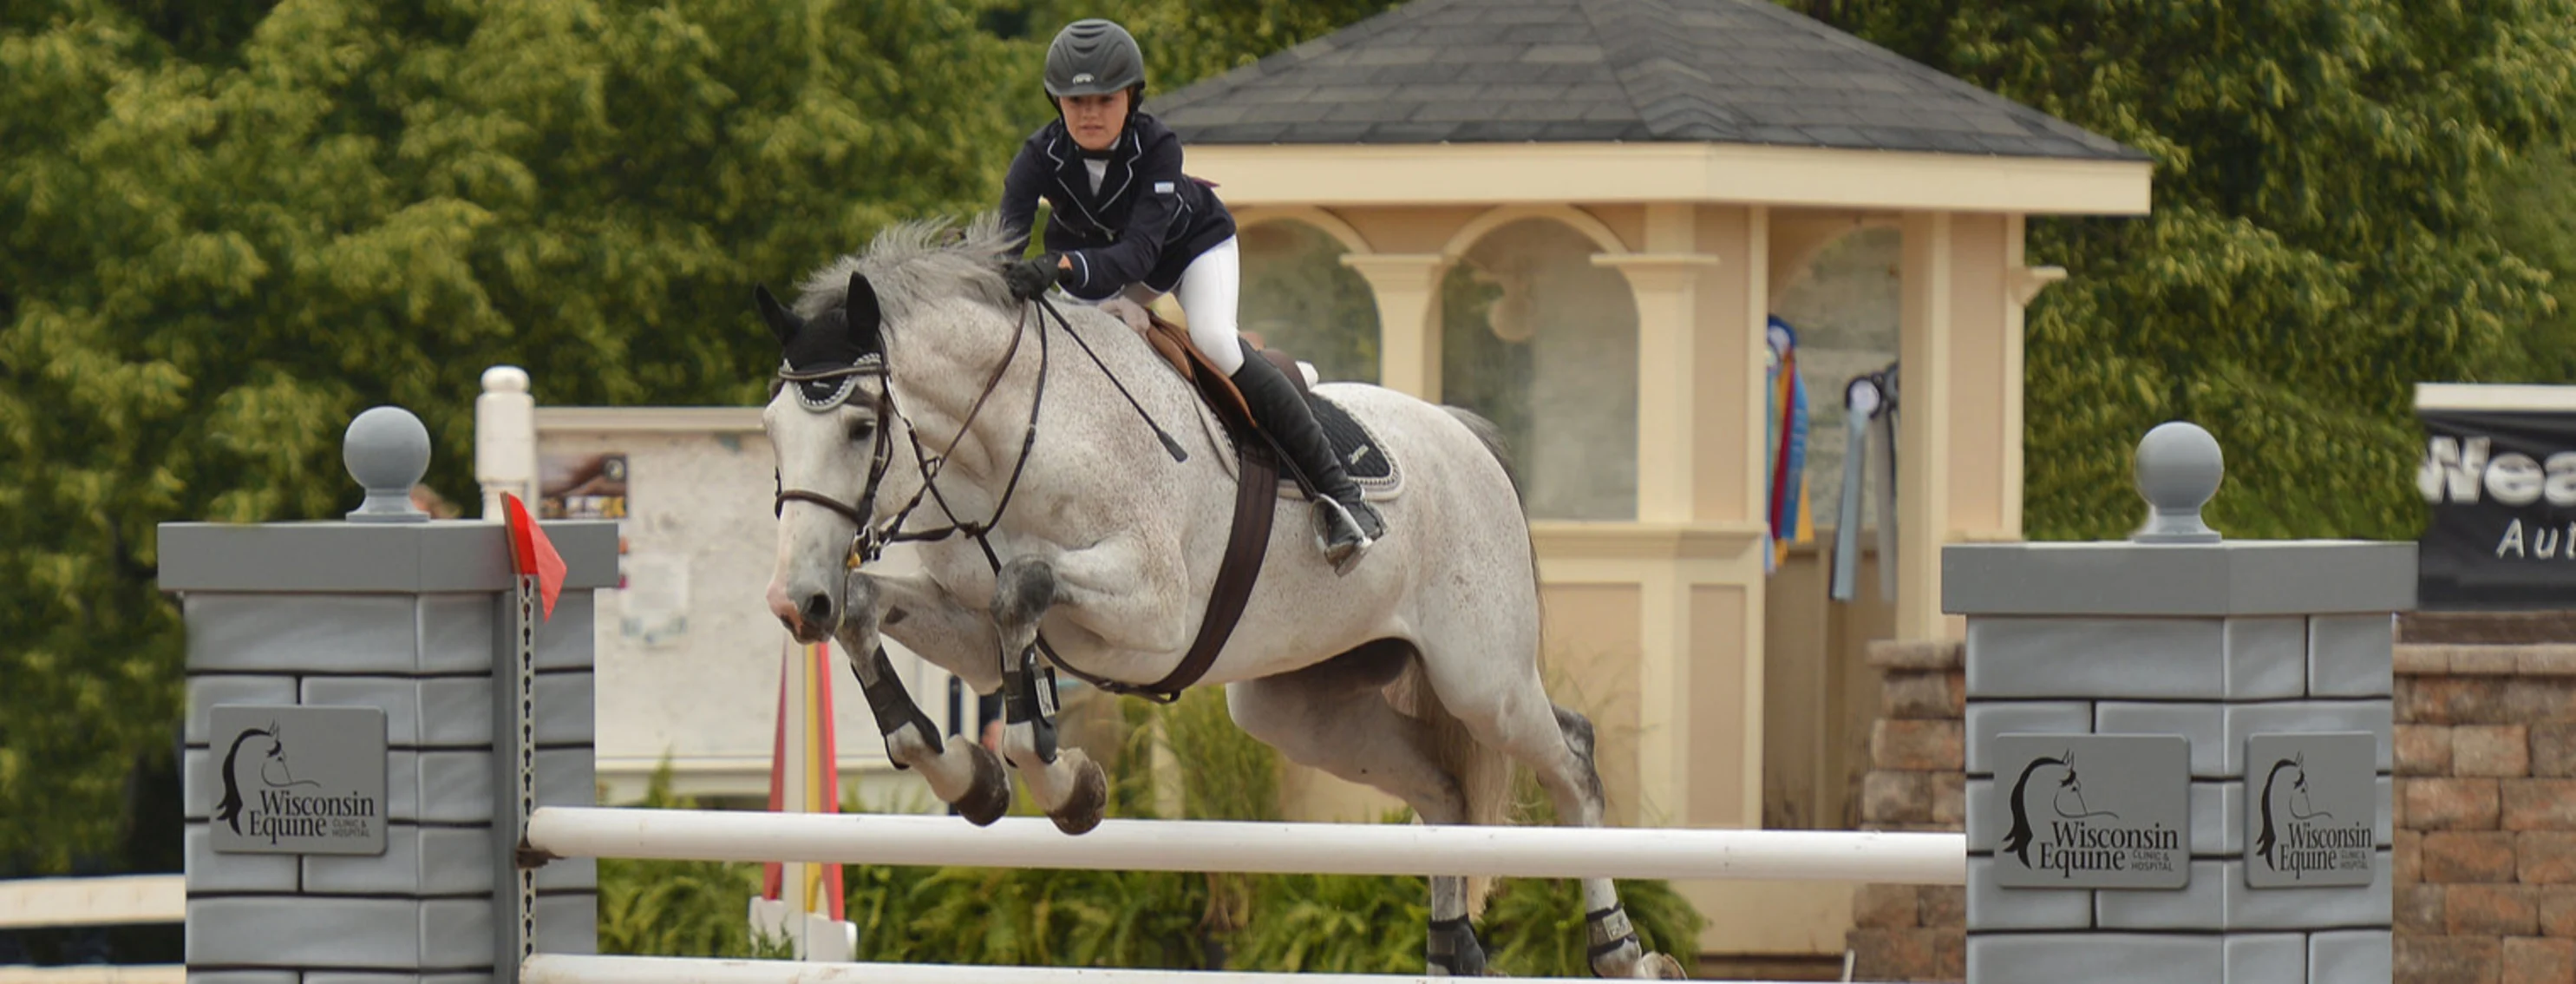 A photo of a horse jumping at a competition